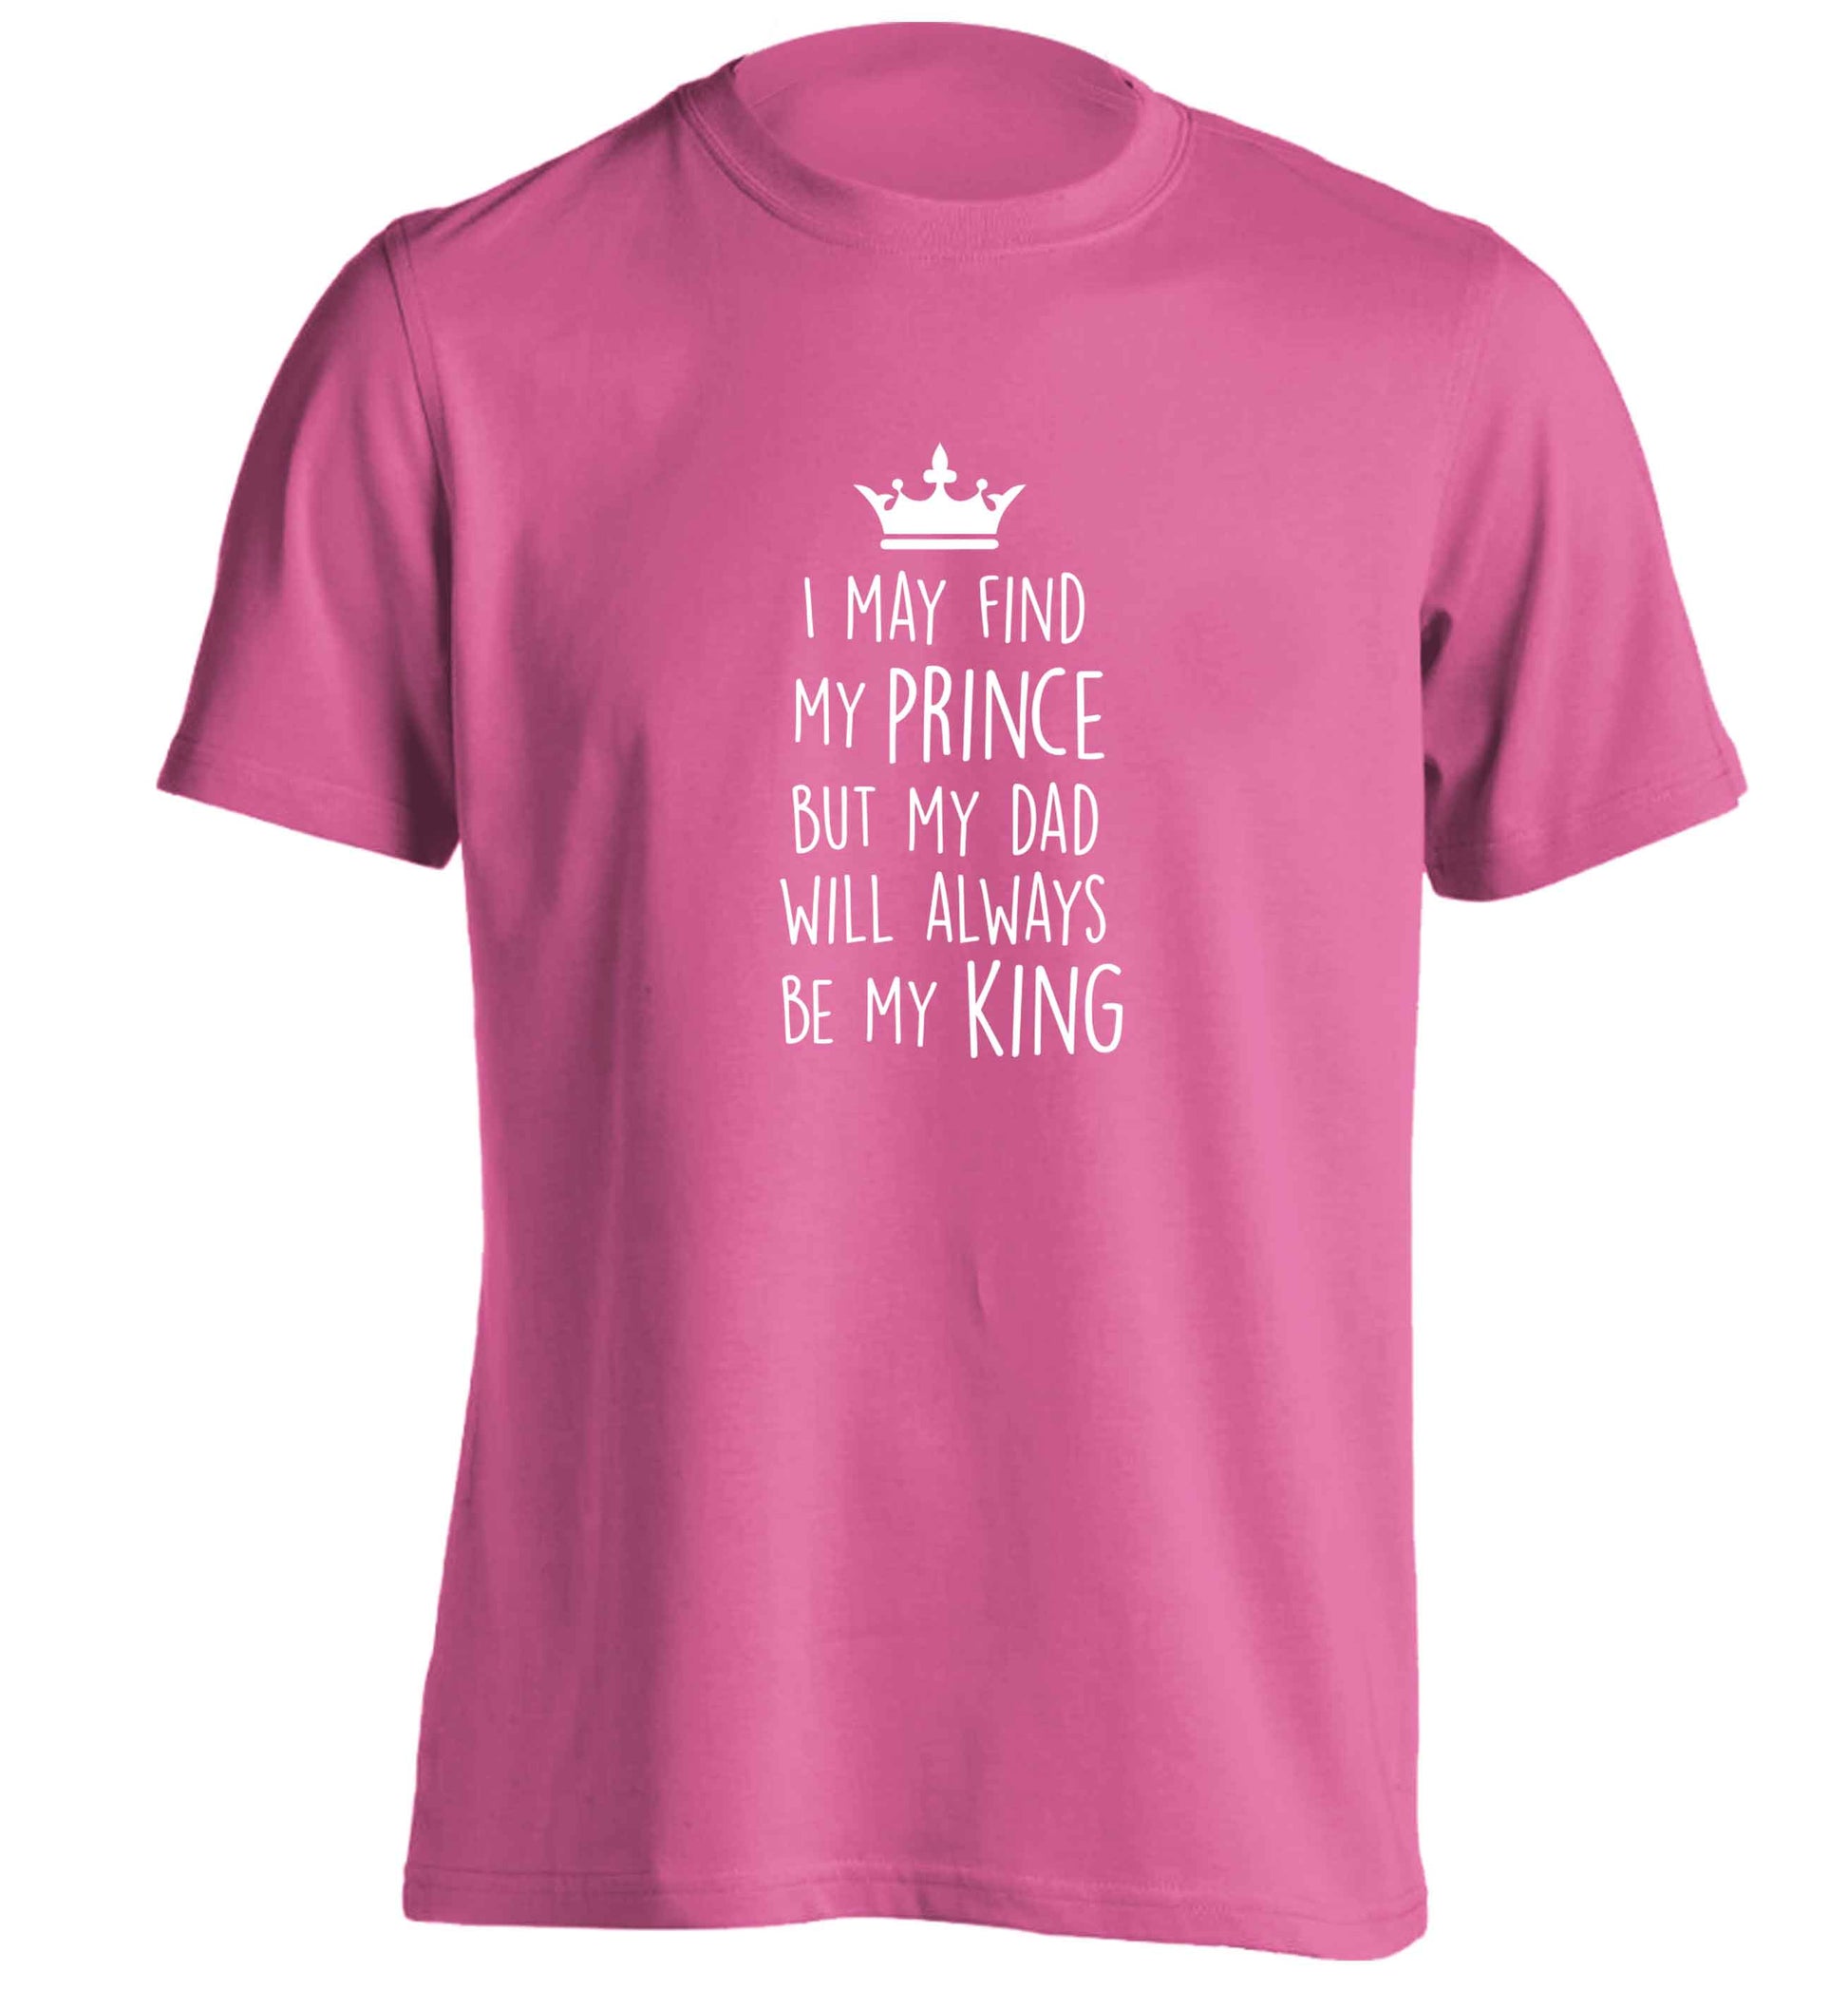 I may find my prince but my dad will always be my king adults unisex pink Tshirt 2XL